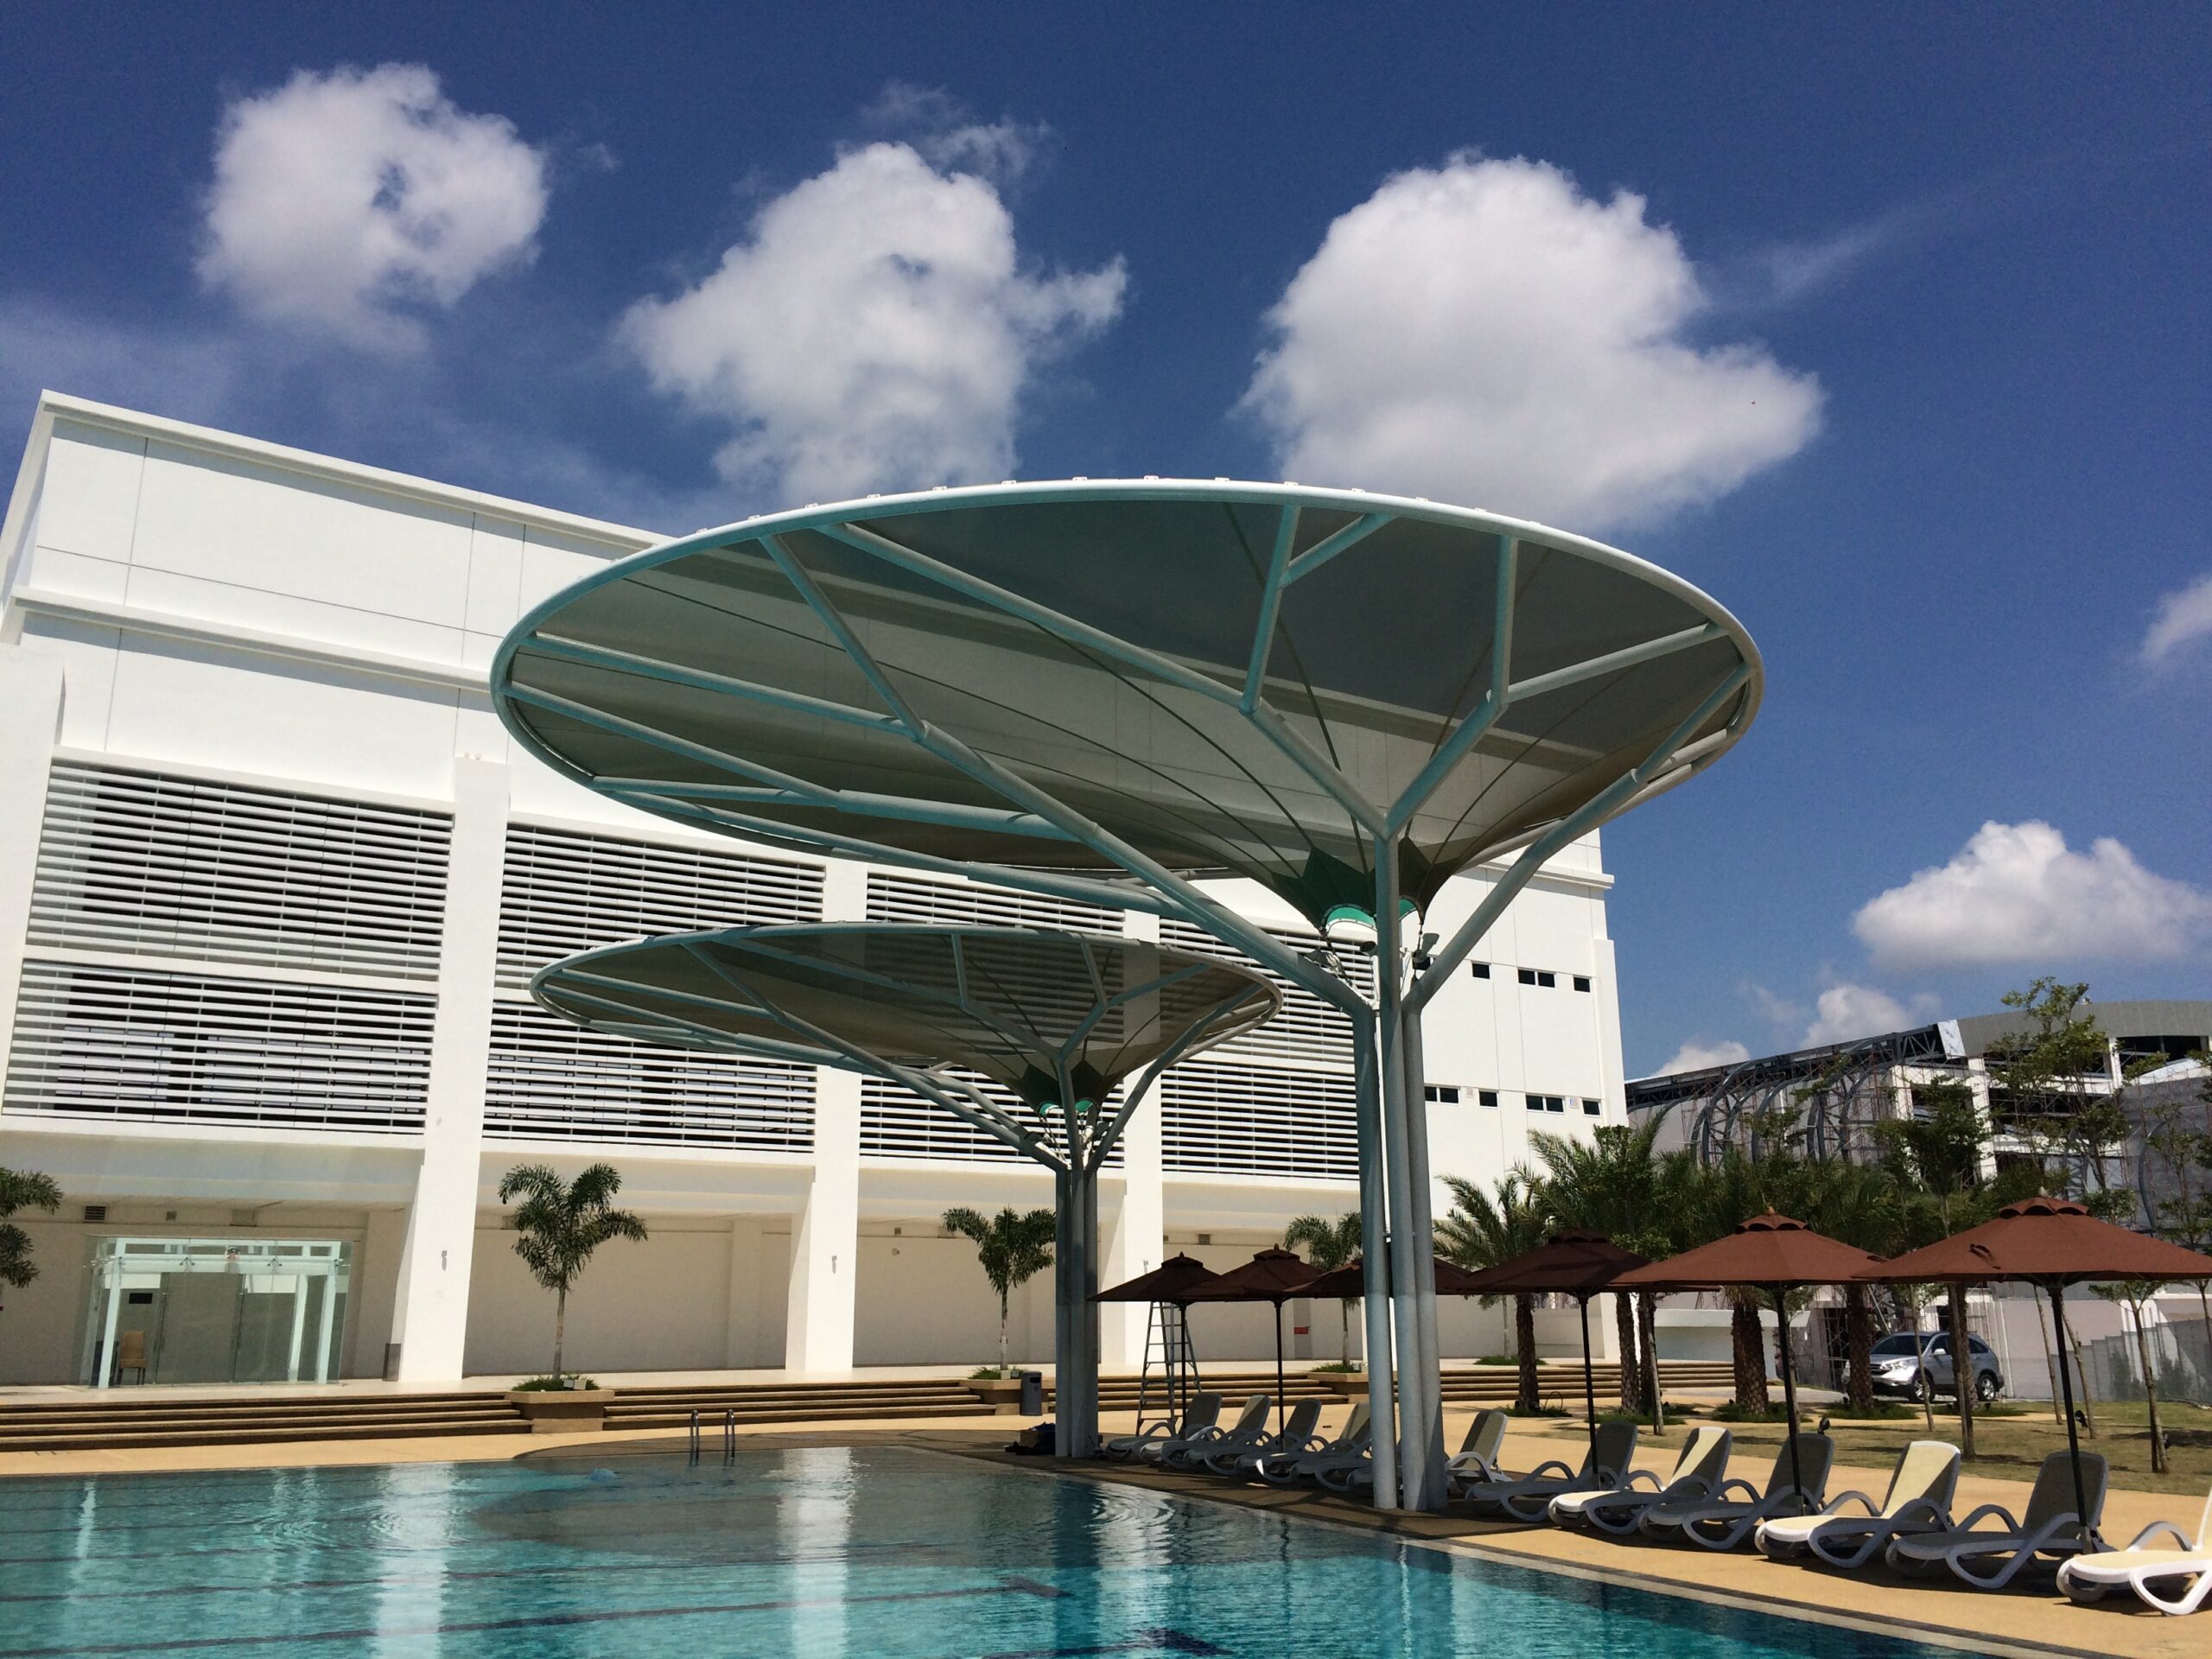 Whimsical tensile fabric structure by TE Membrane at D'Tempat Country Club, Seremban